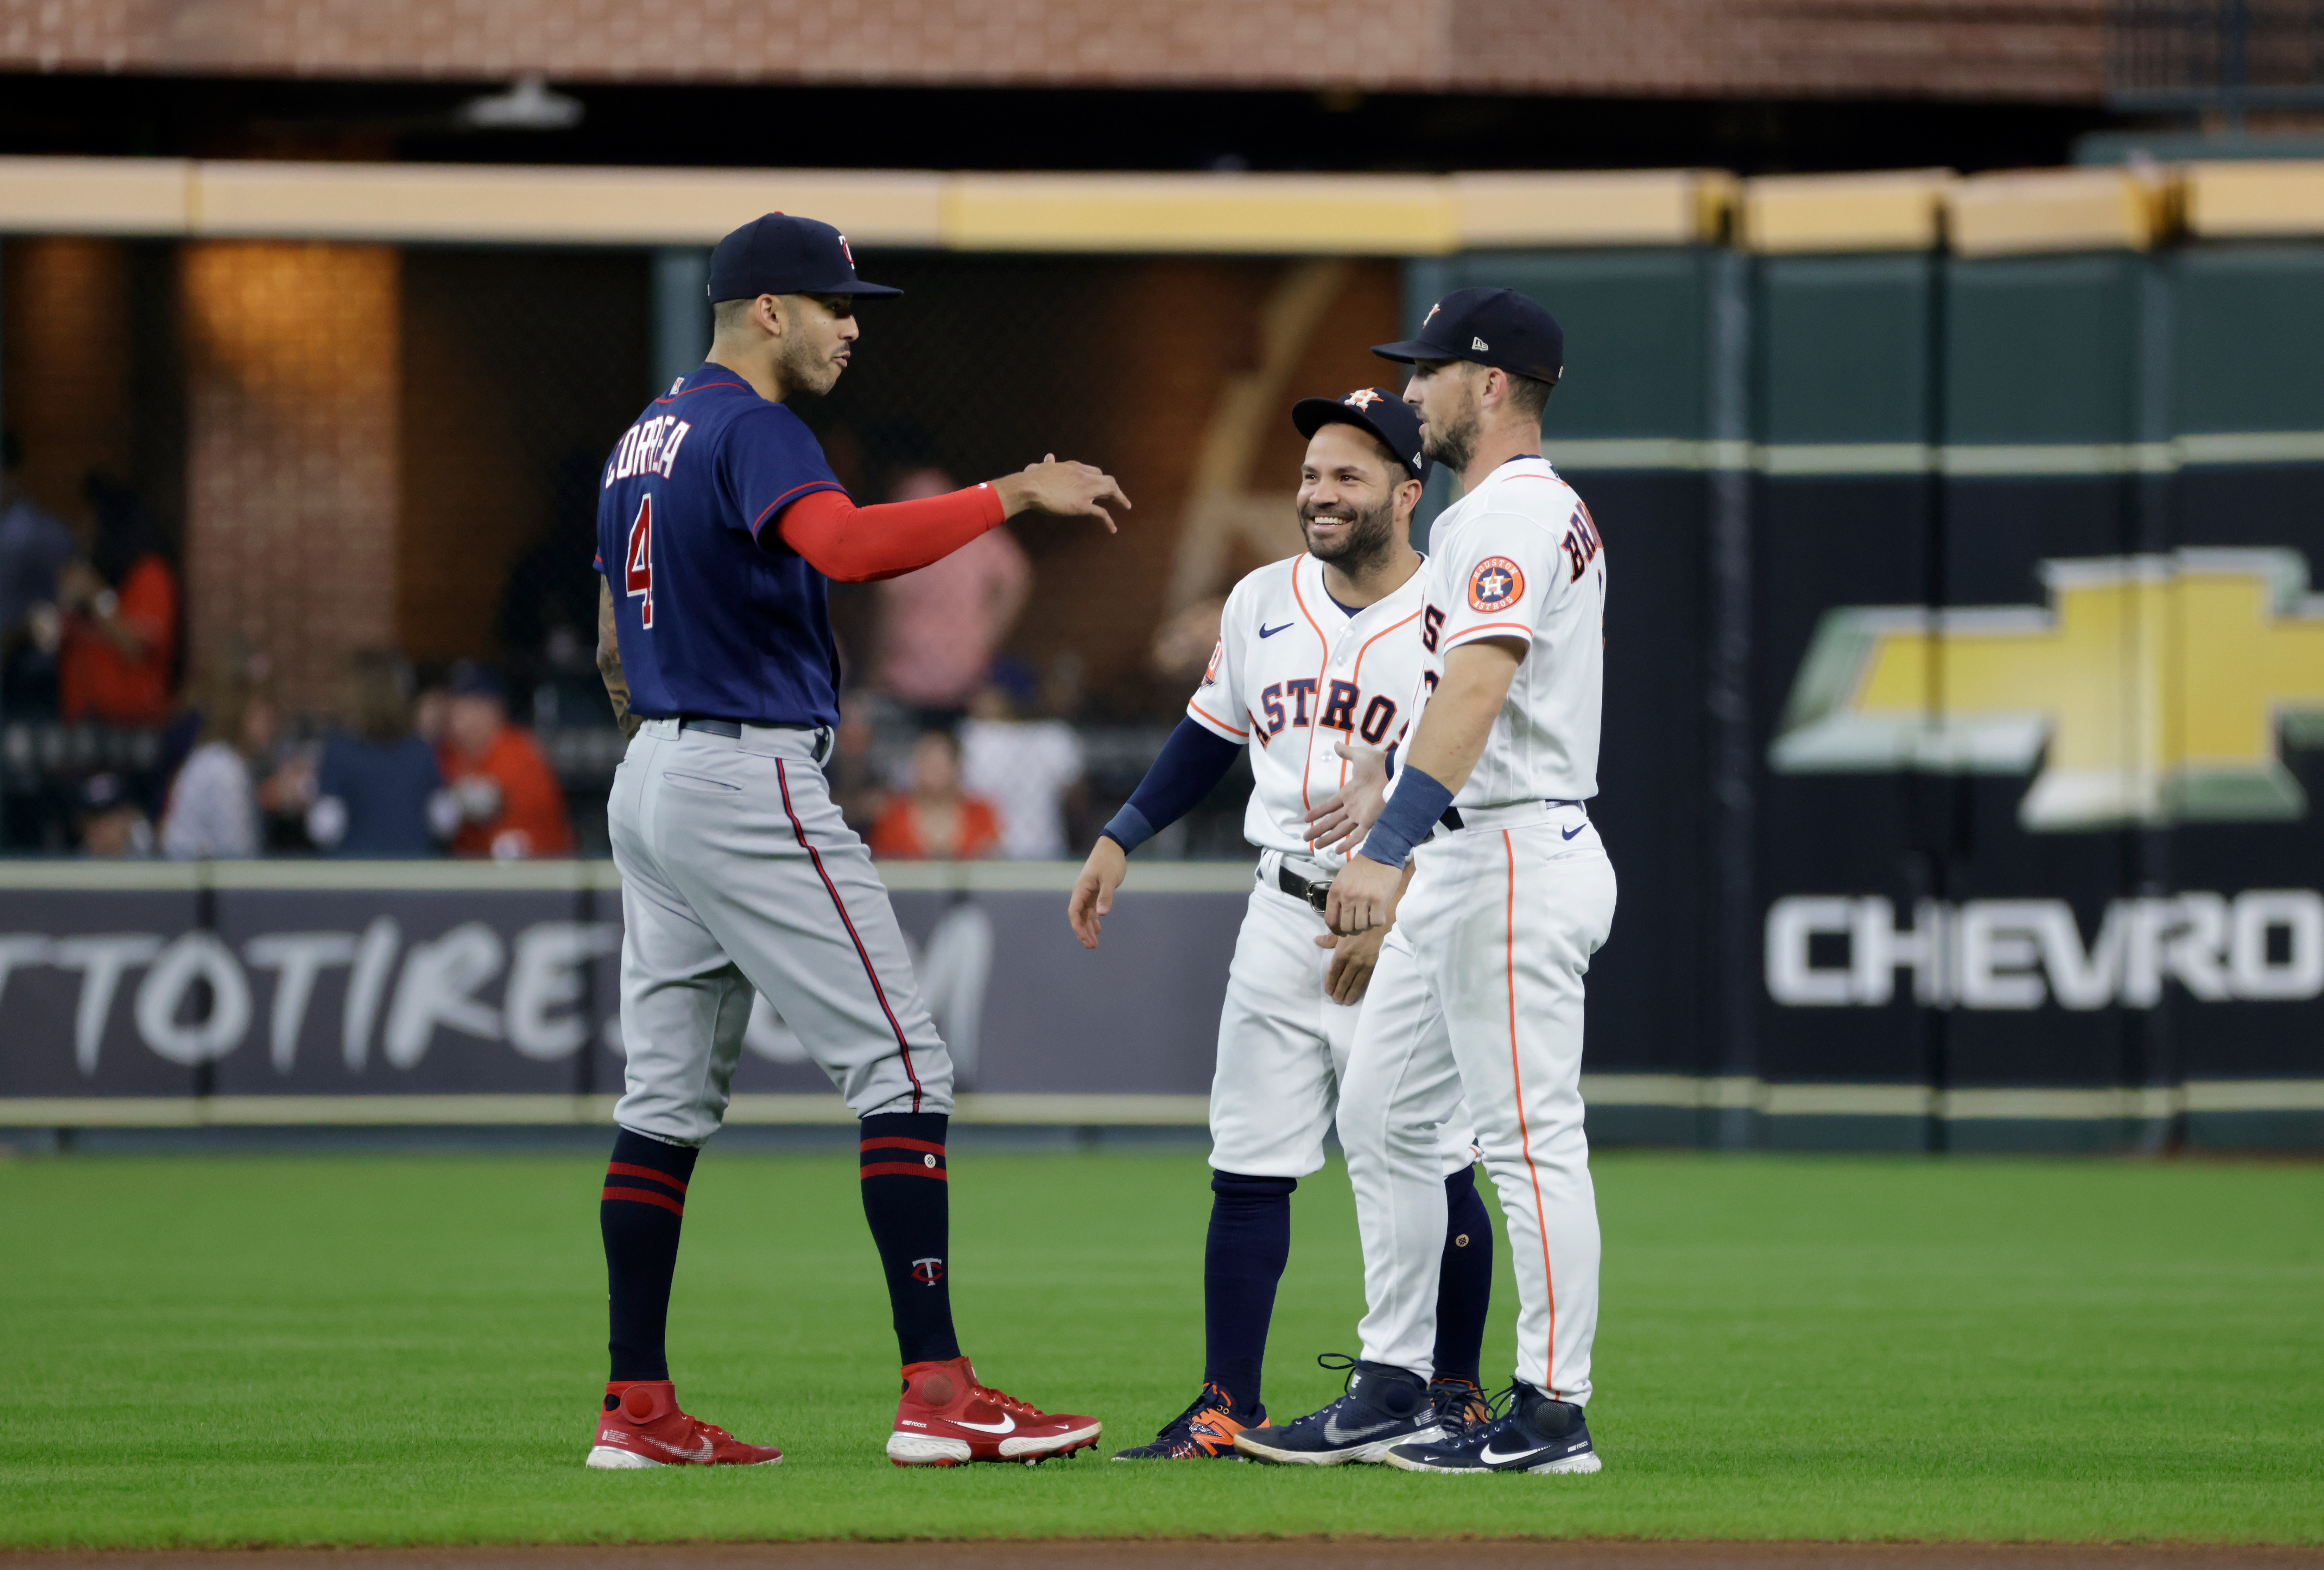 ALDS now a best-of-three series with Twins returning home to Sonny